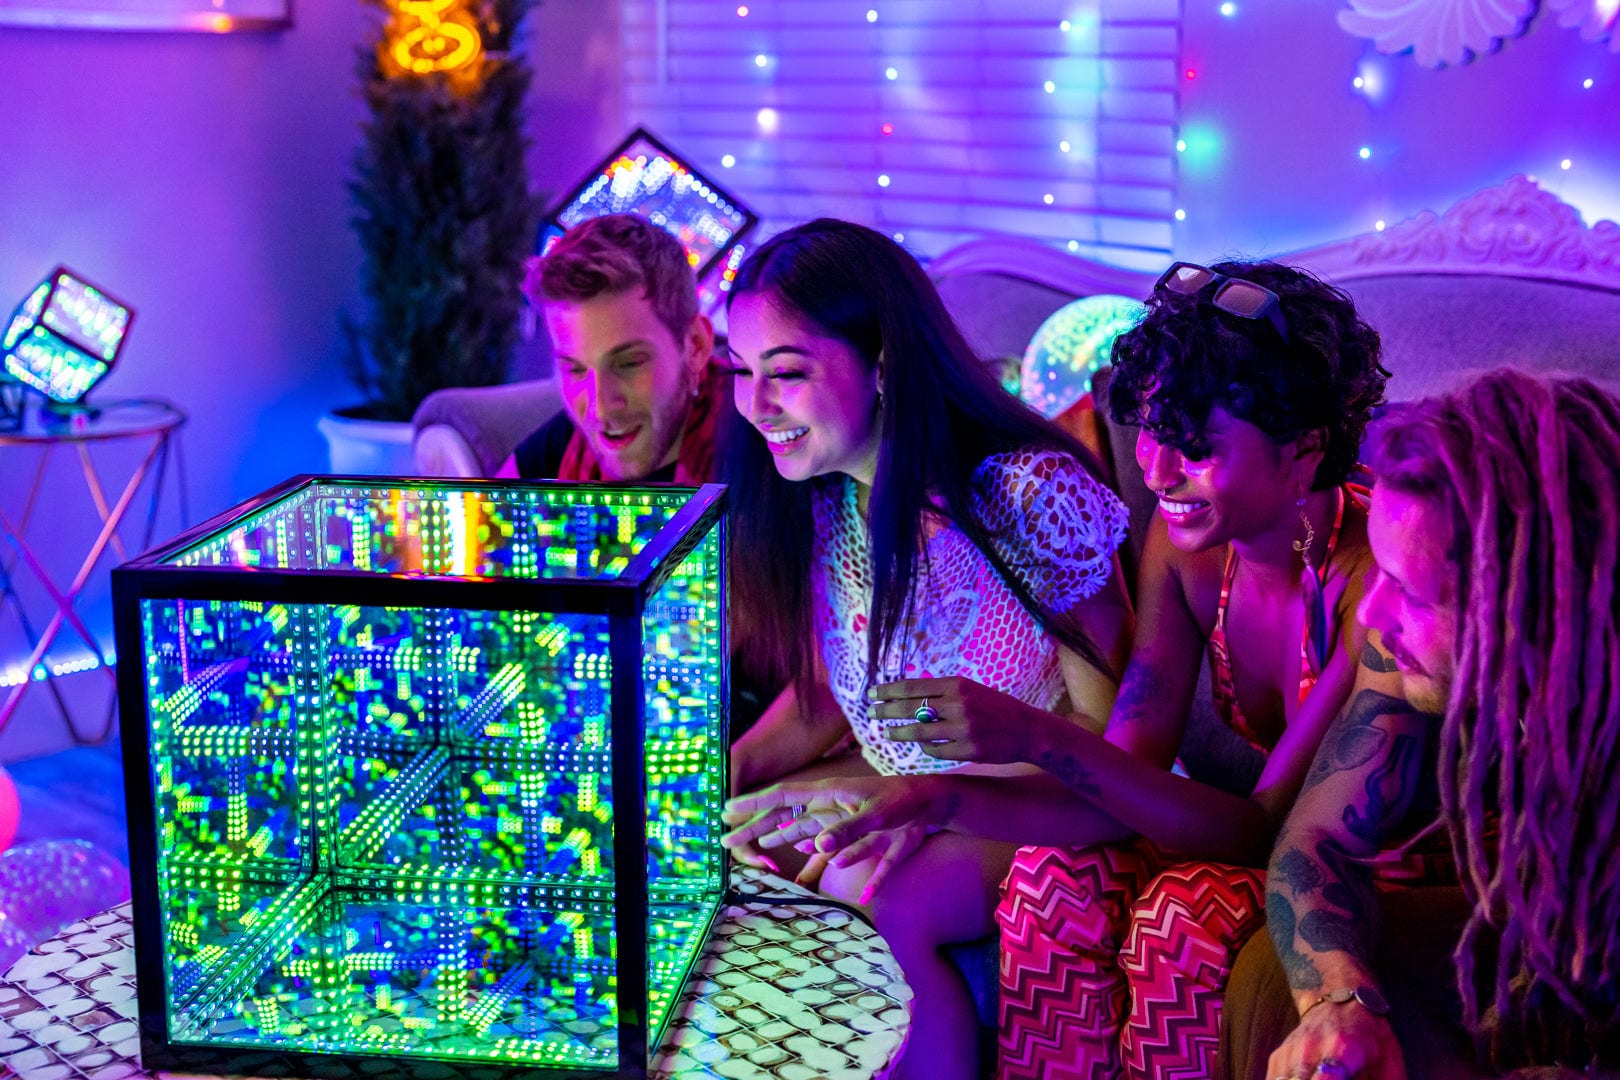 Friends on couch in bedroom looking at HyperCube that is part of host’s bedroom mood lighting ideas